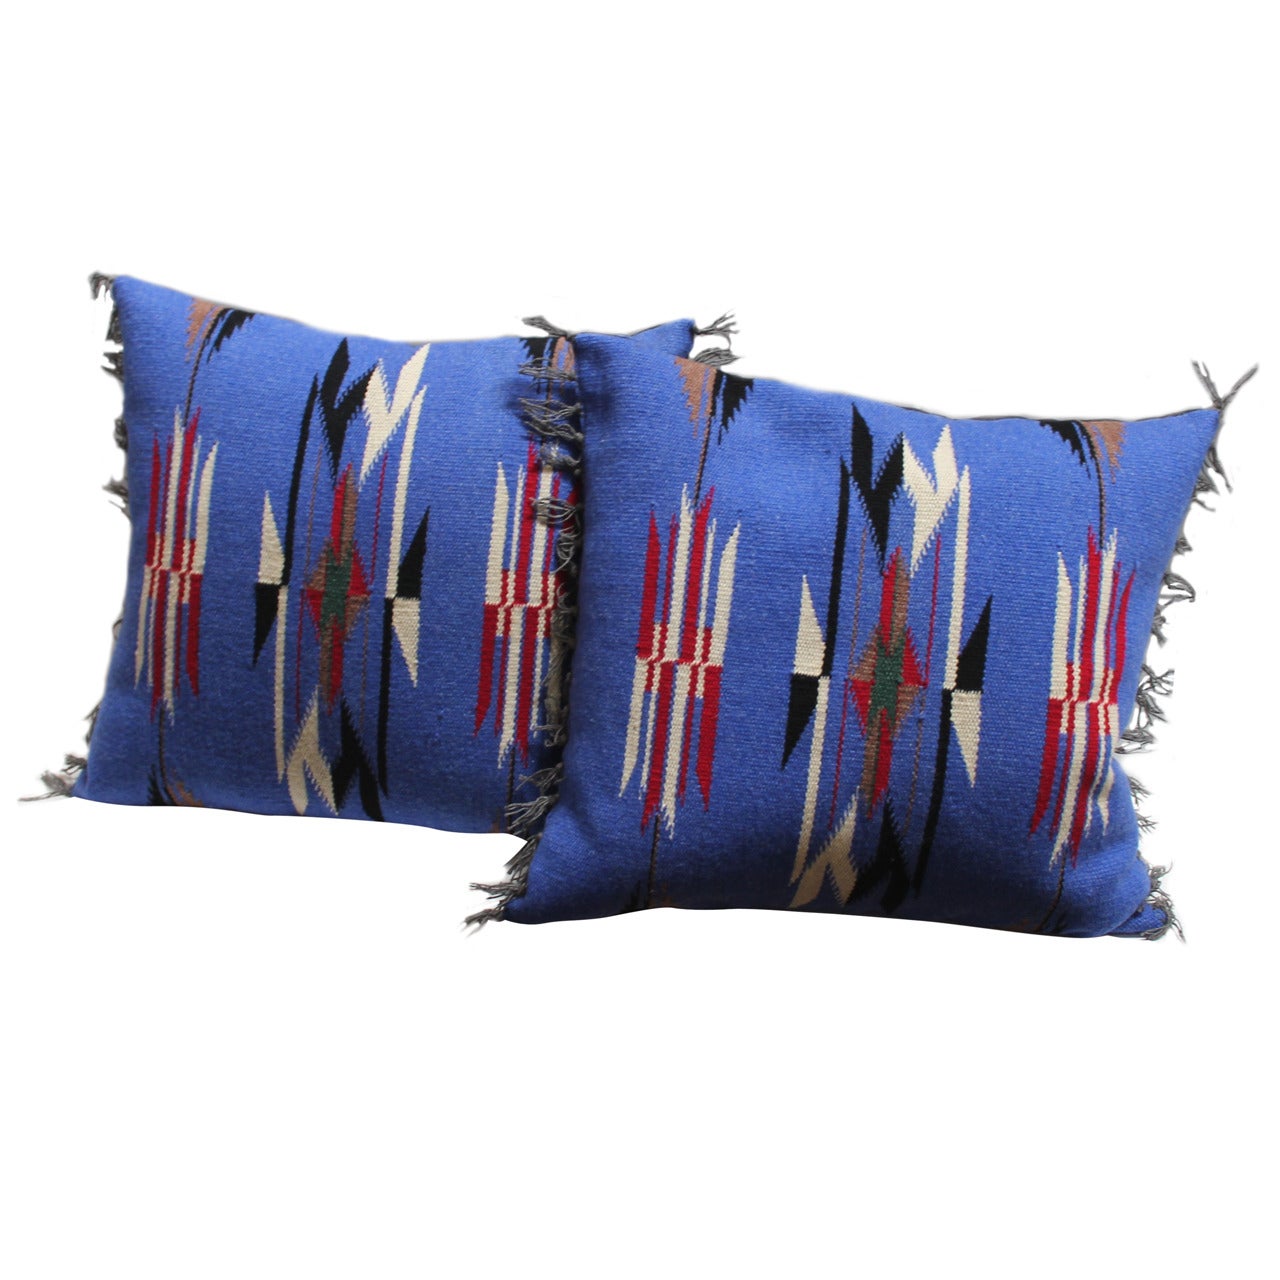 Pair of Mexican-American Chimayo Indian Weaving Pillows